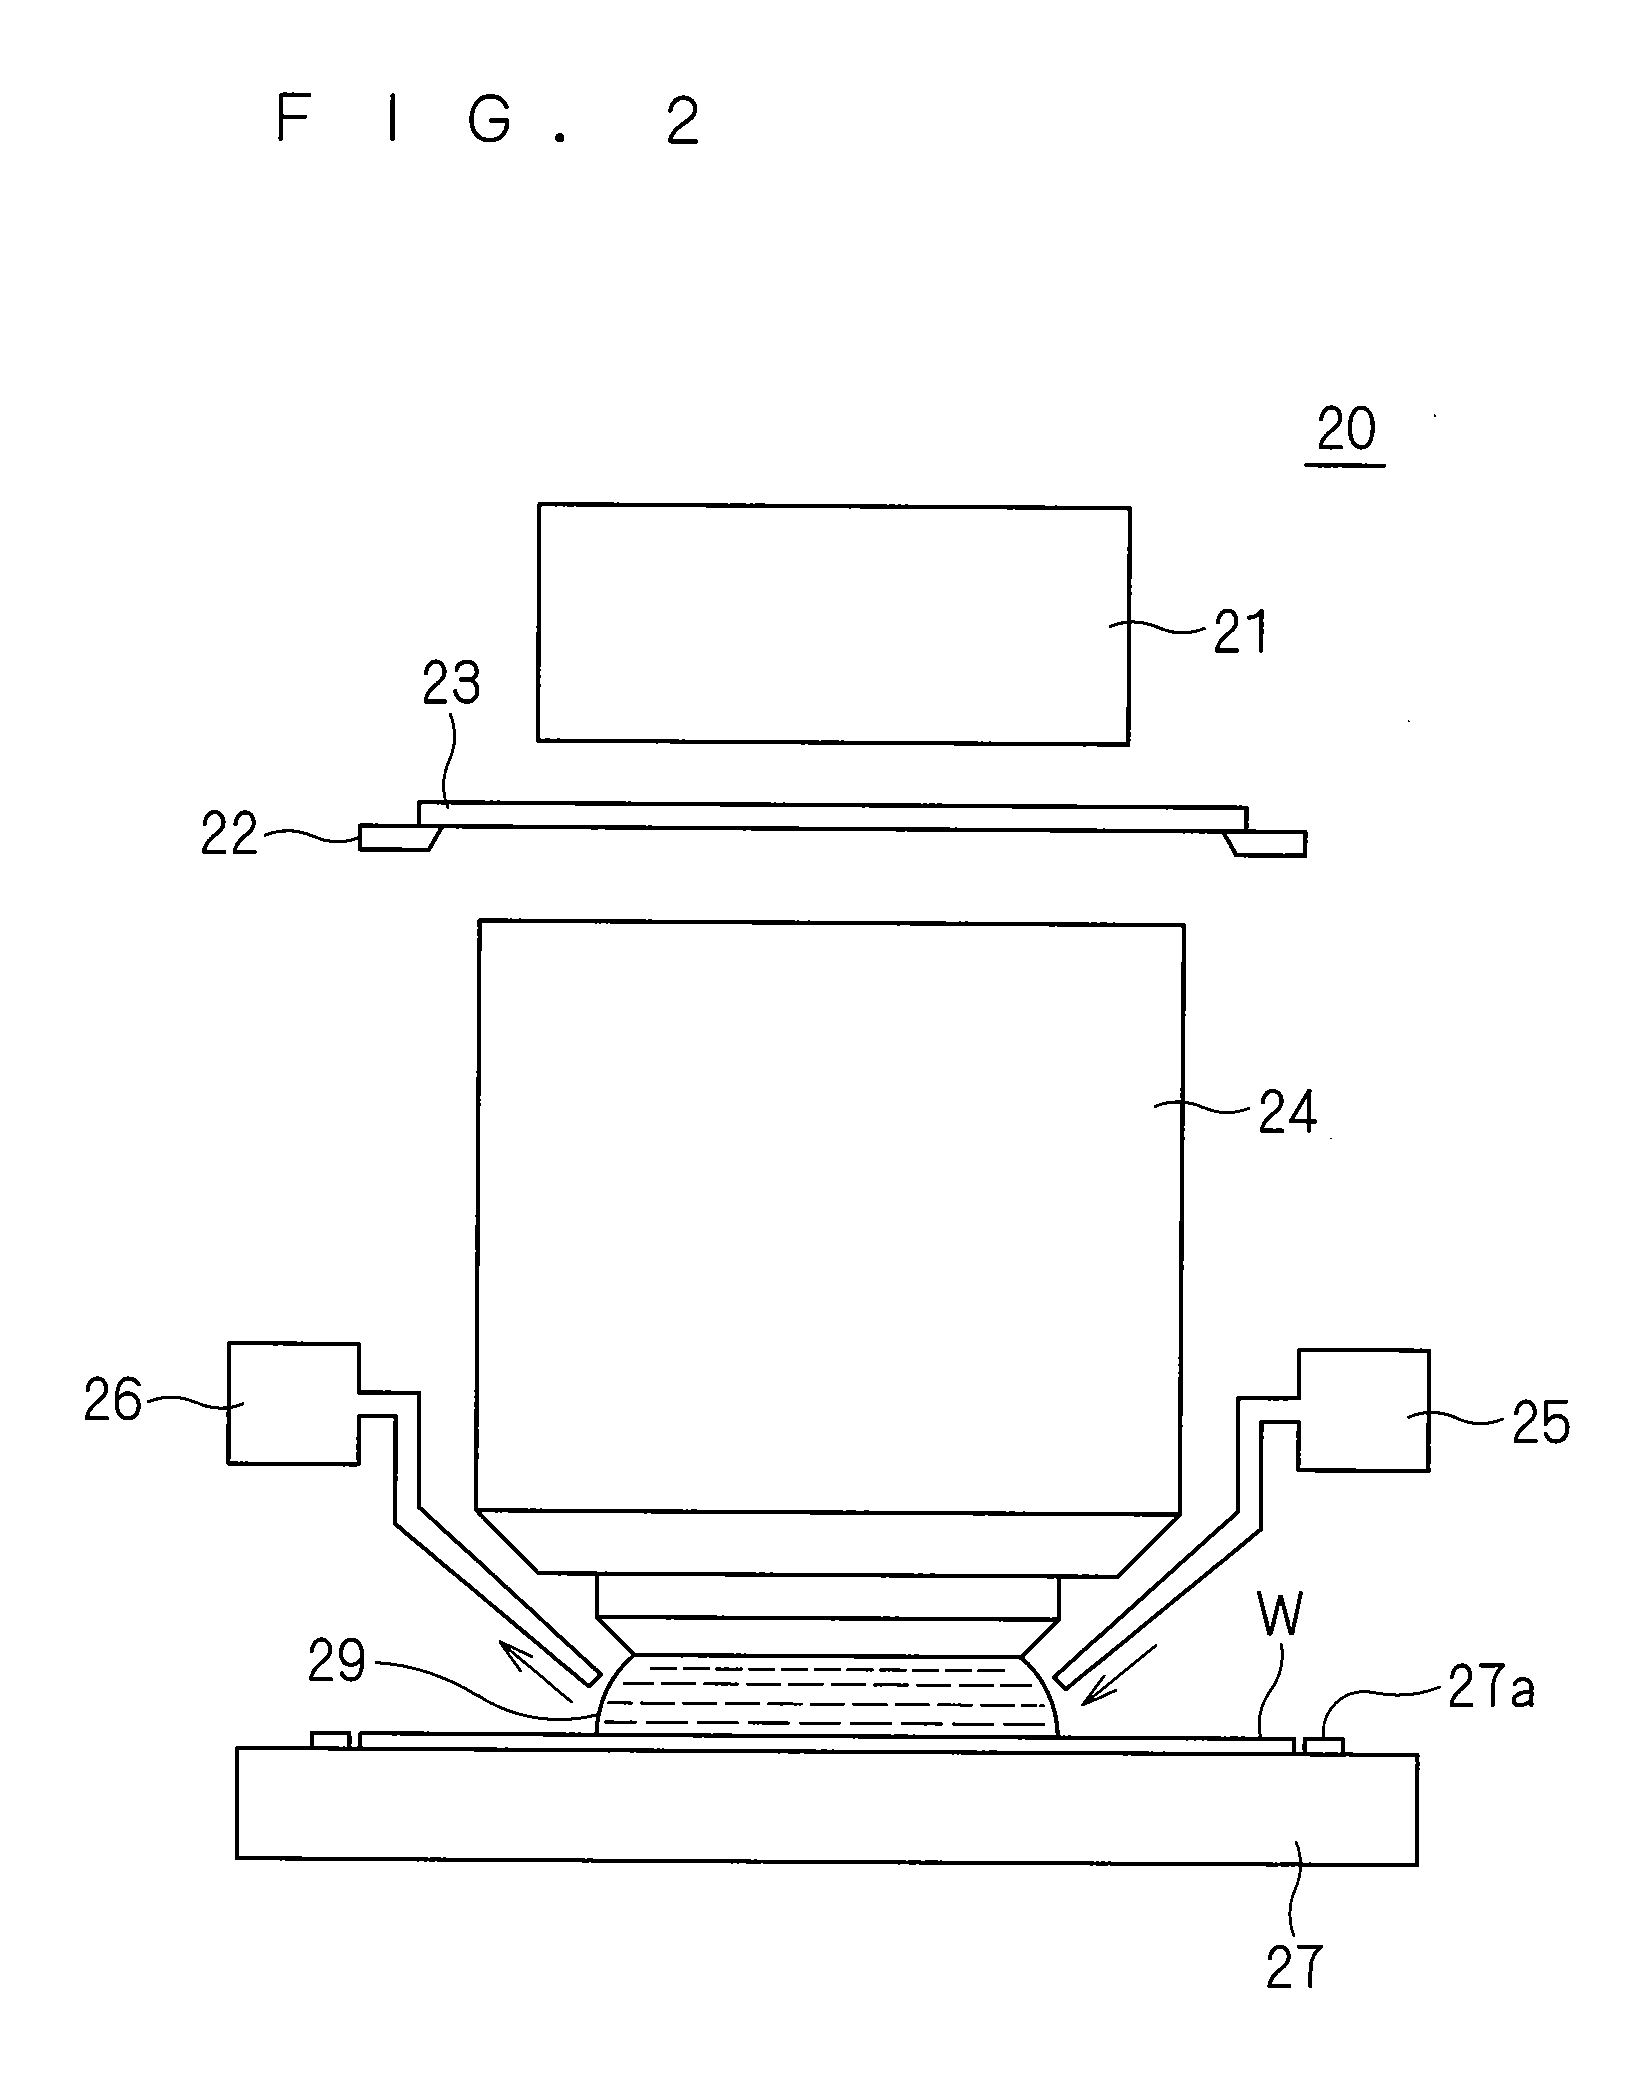 Substrate processing apparatus for performing exposure process